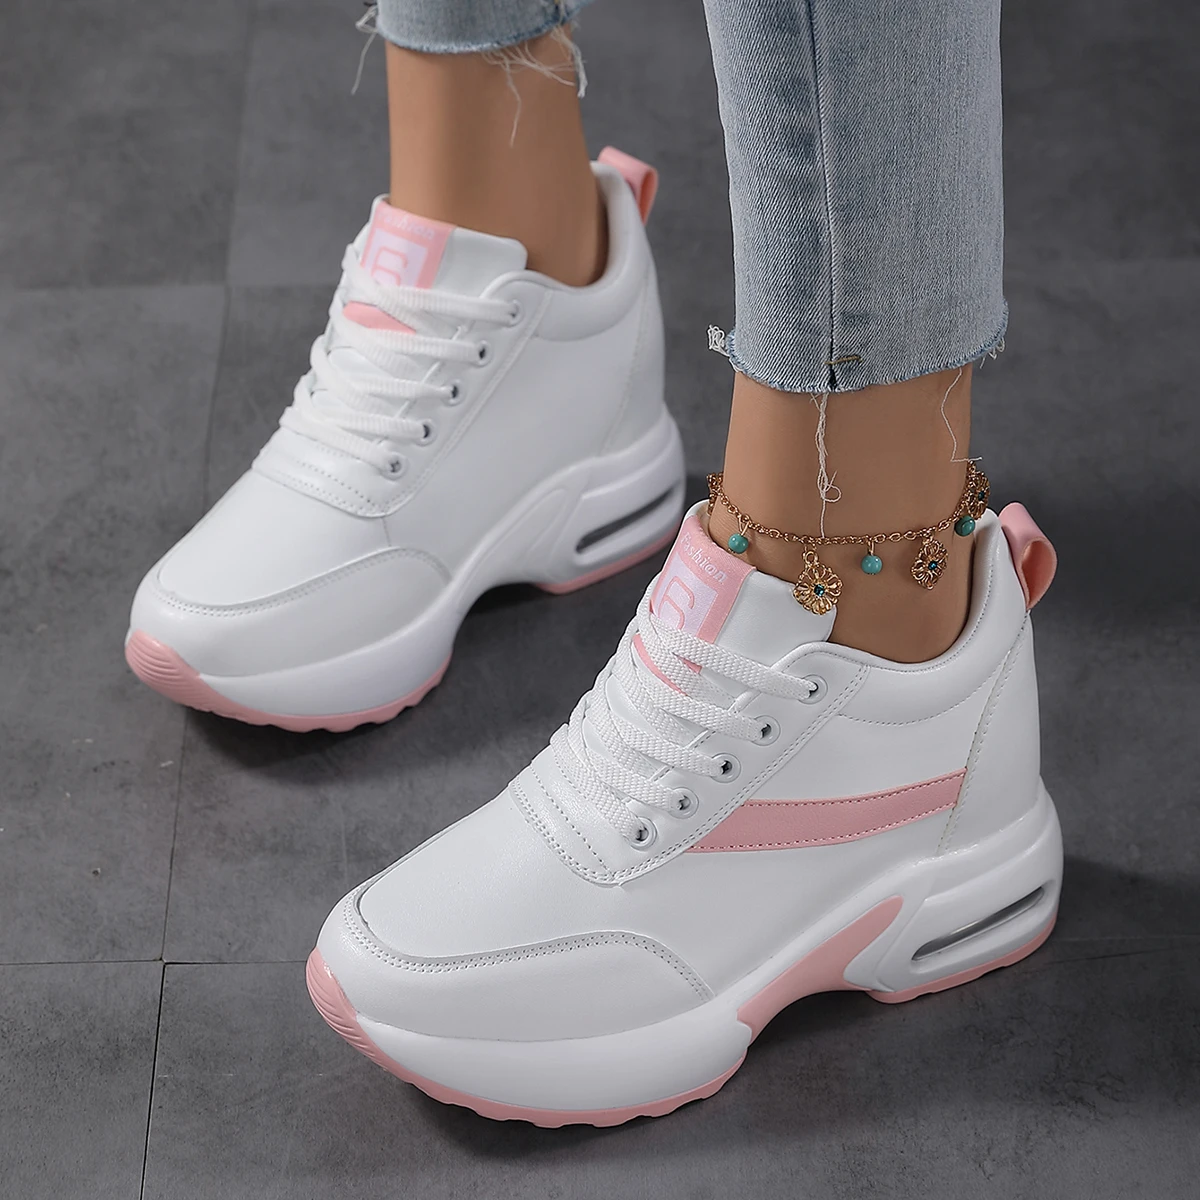 

Women's Platform Sneakers White Wedges High Top Lace Up Girls Shoes Air Cushion Increased Internal Fashion Sneakers Resistant